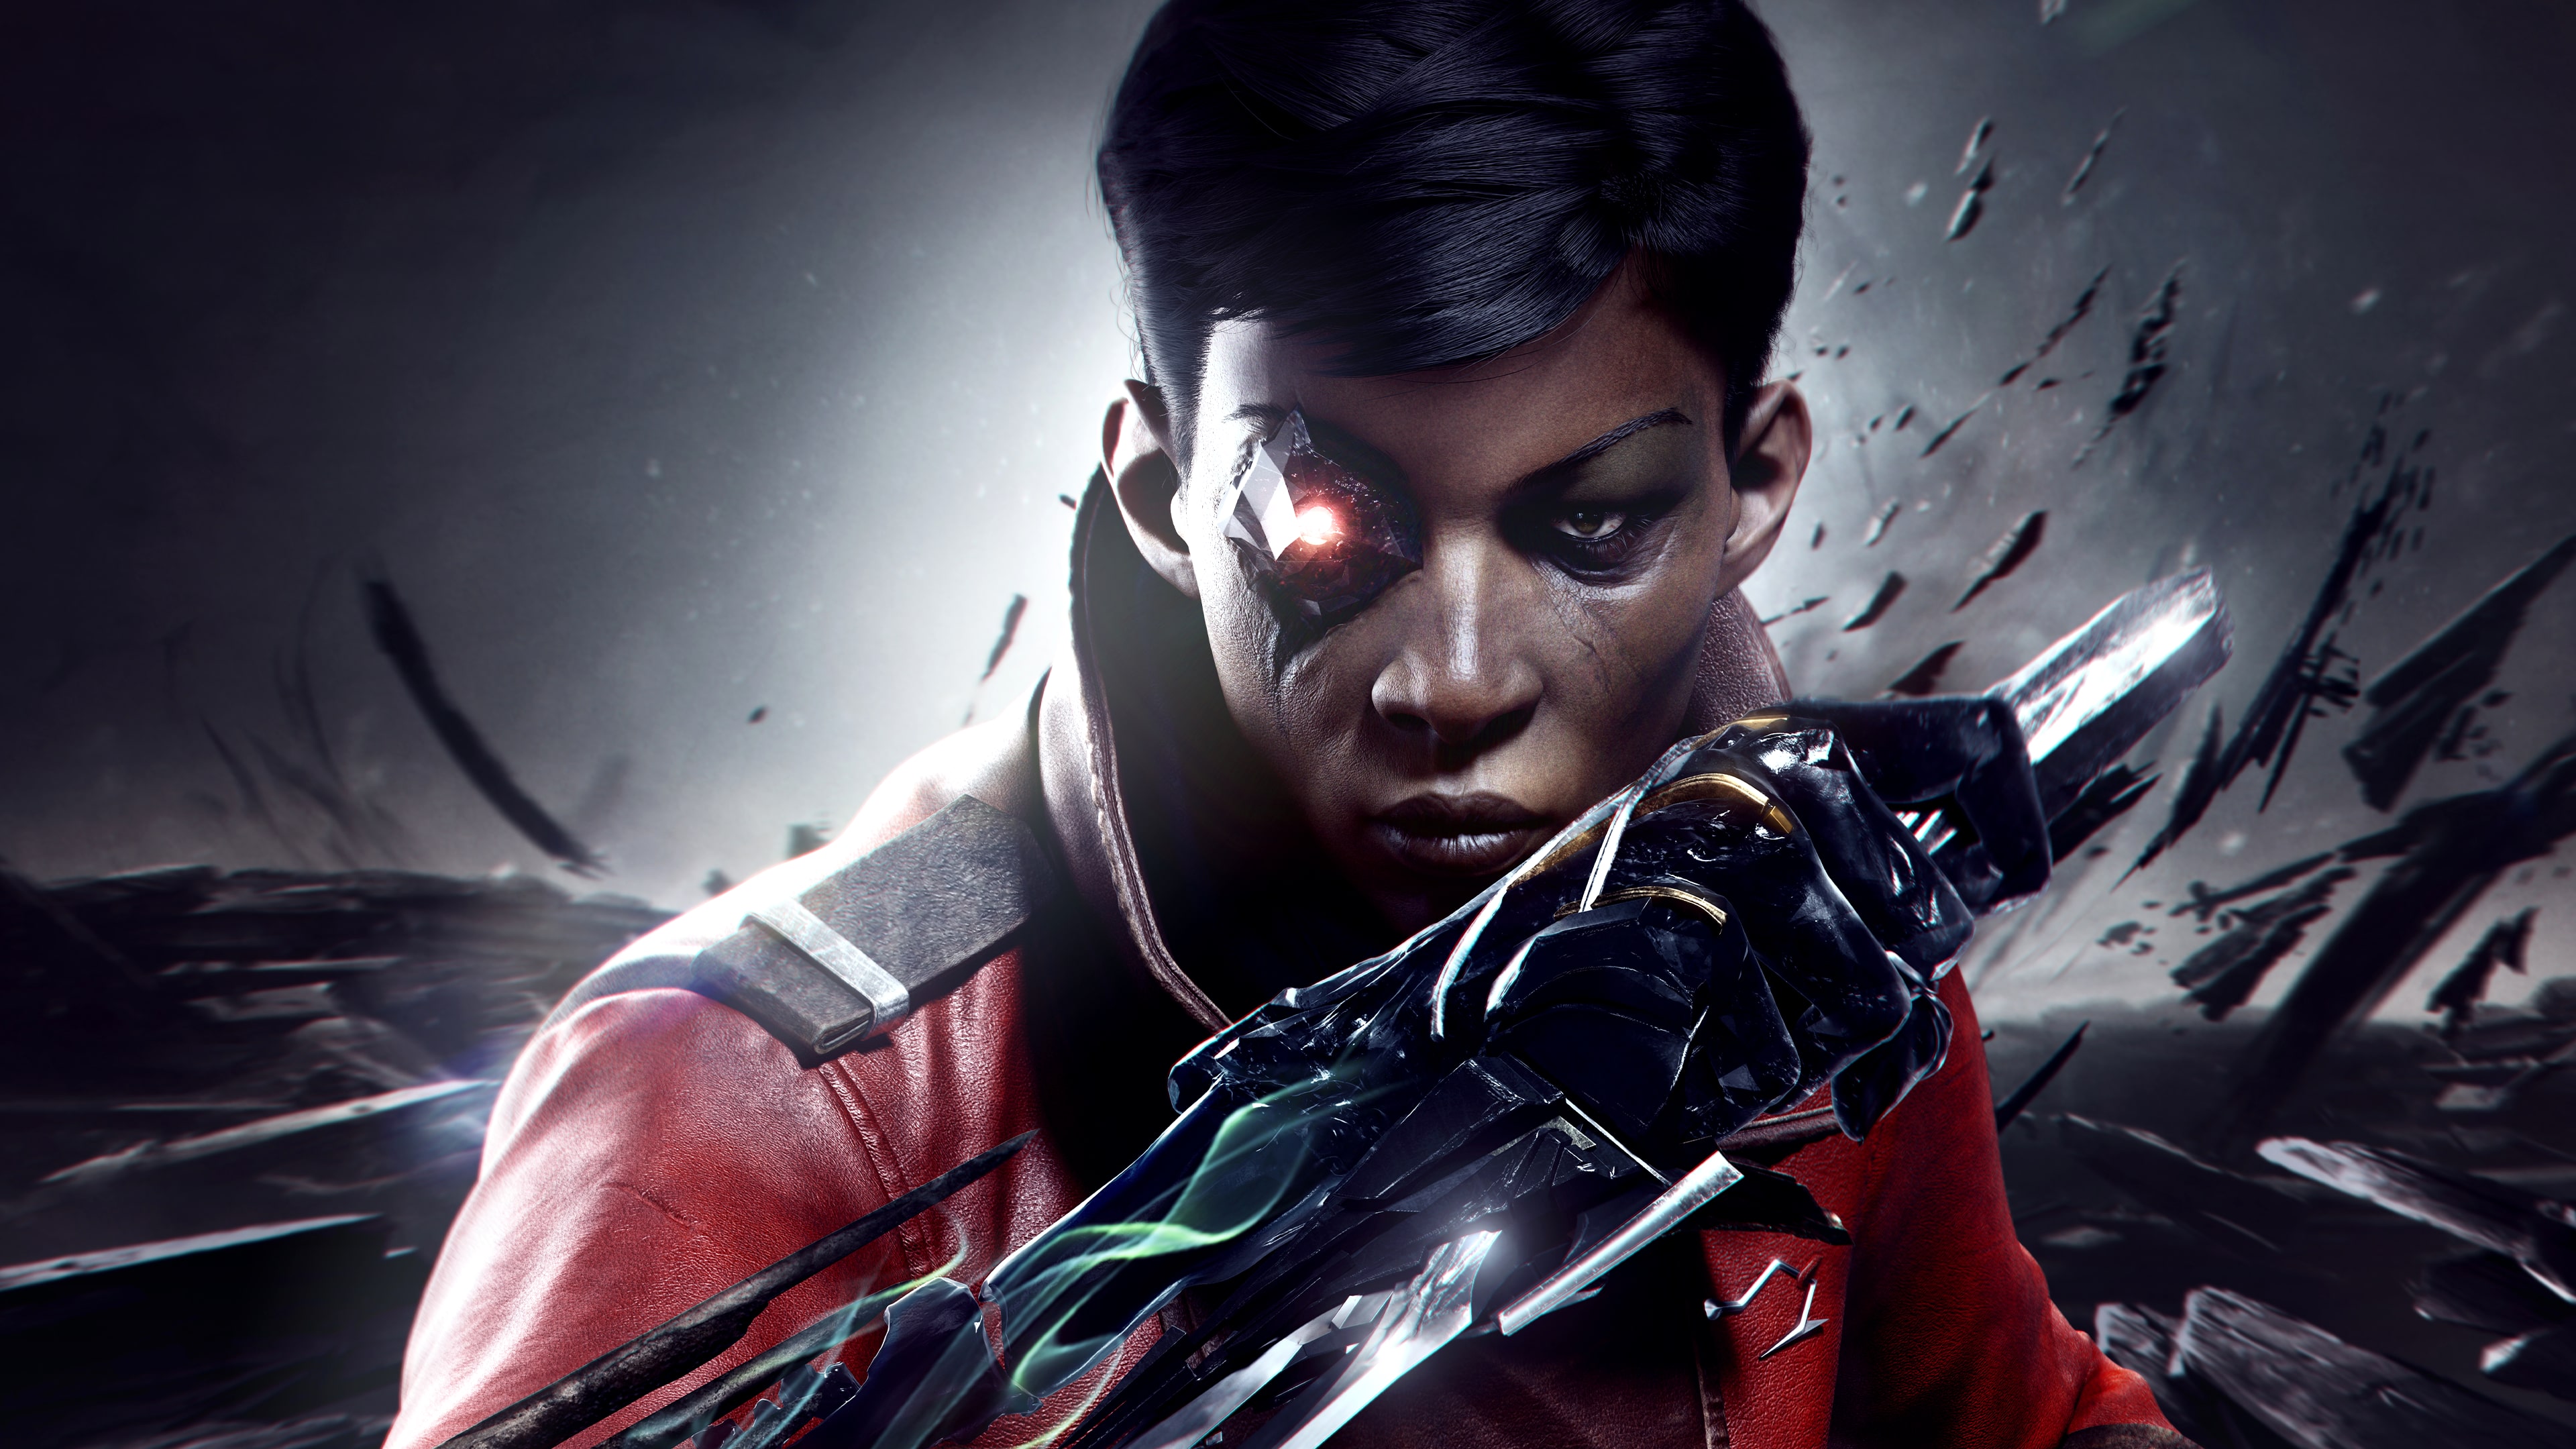 Dishonored®: Death of the Outsider™